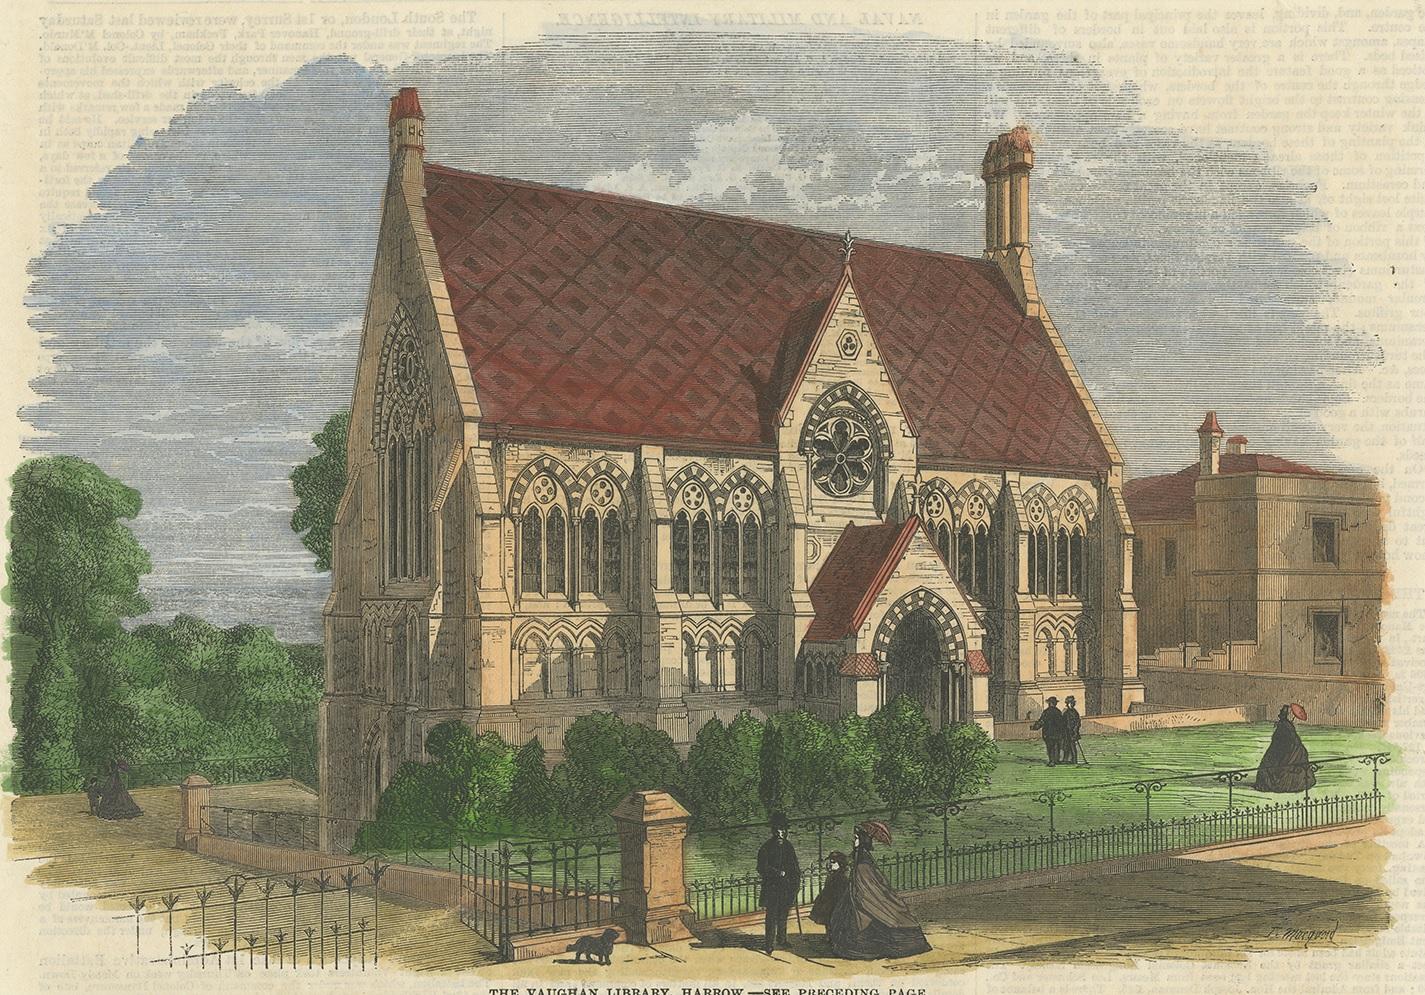 Antique print titled 'The Vaughan Library, Harrow'. View of the Vaughan Library, part of Harrow school. It is over 150 years old and was designed in Victorian Gothic style by George Gilbert Scott. This print originates from 'The Illustrated London